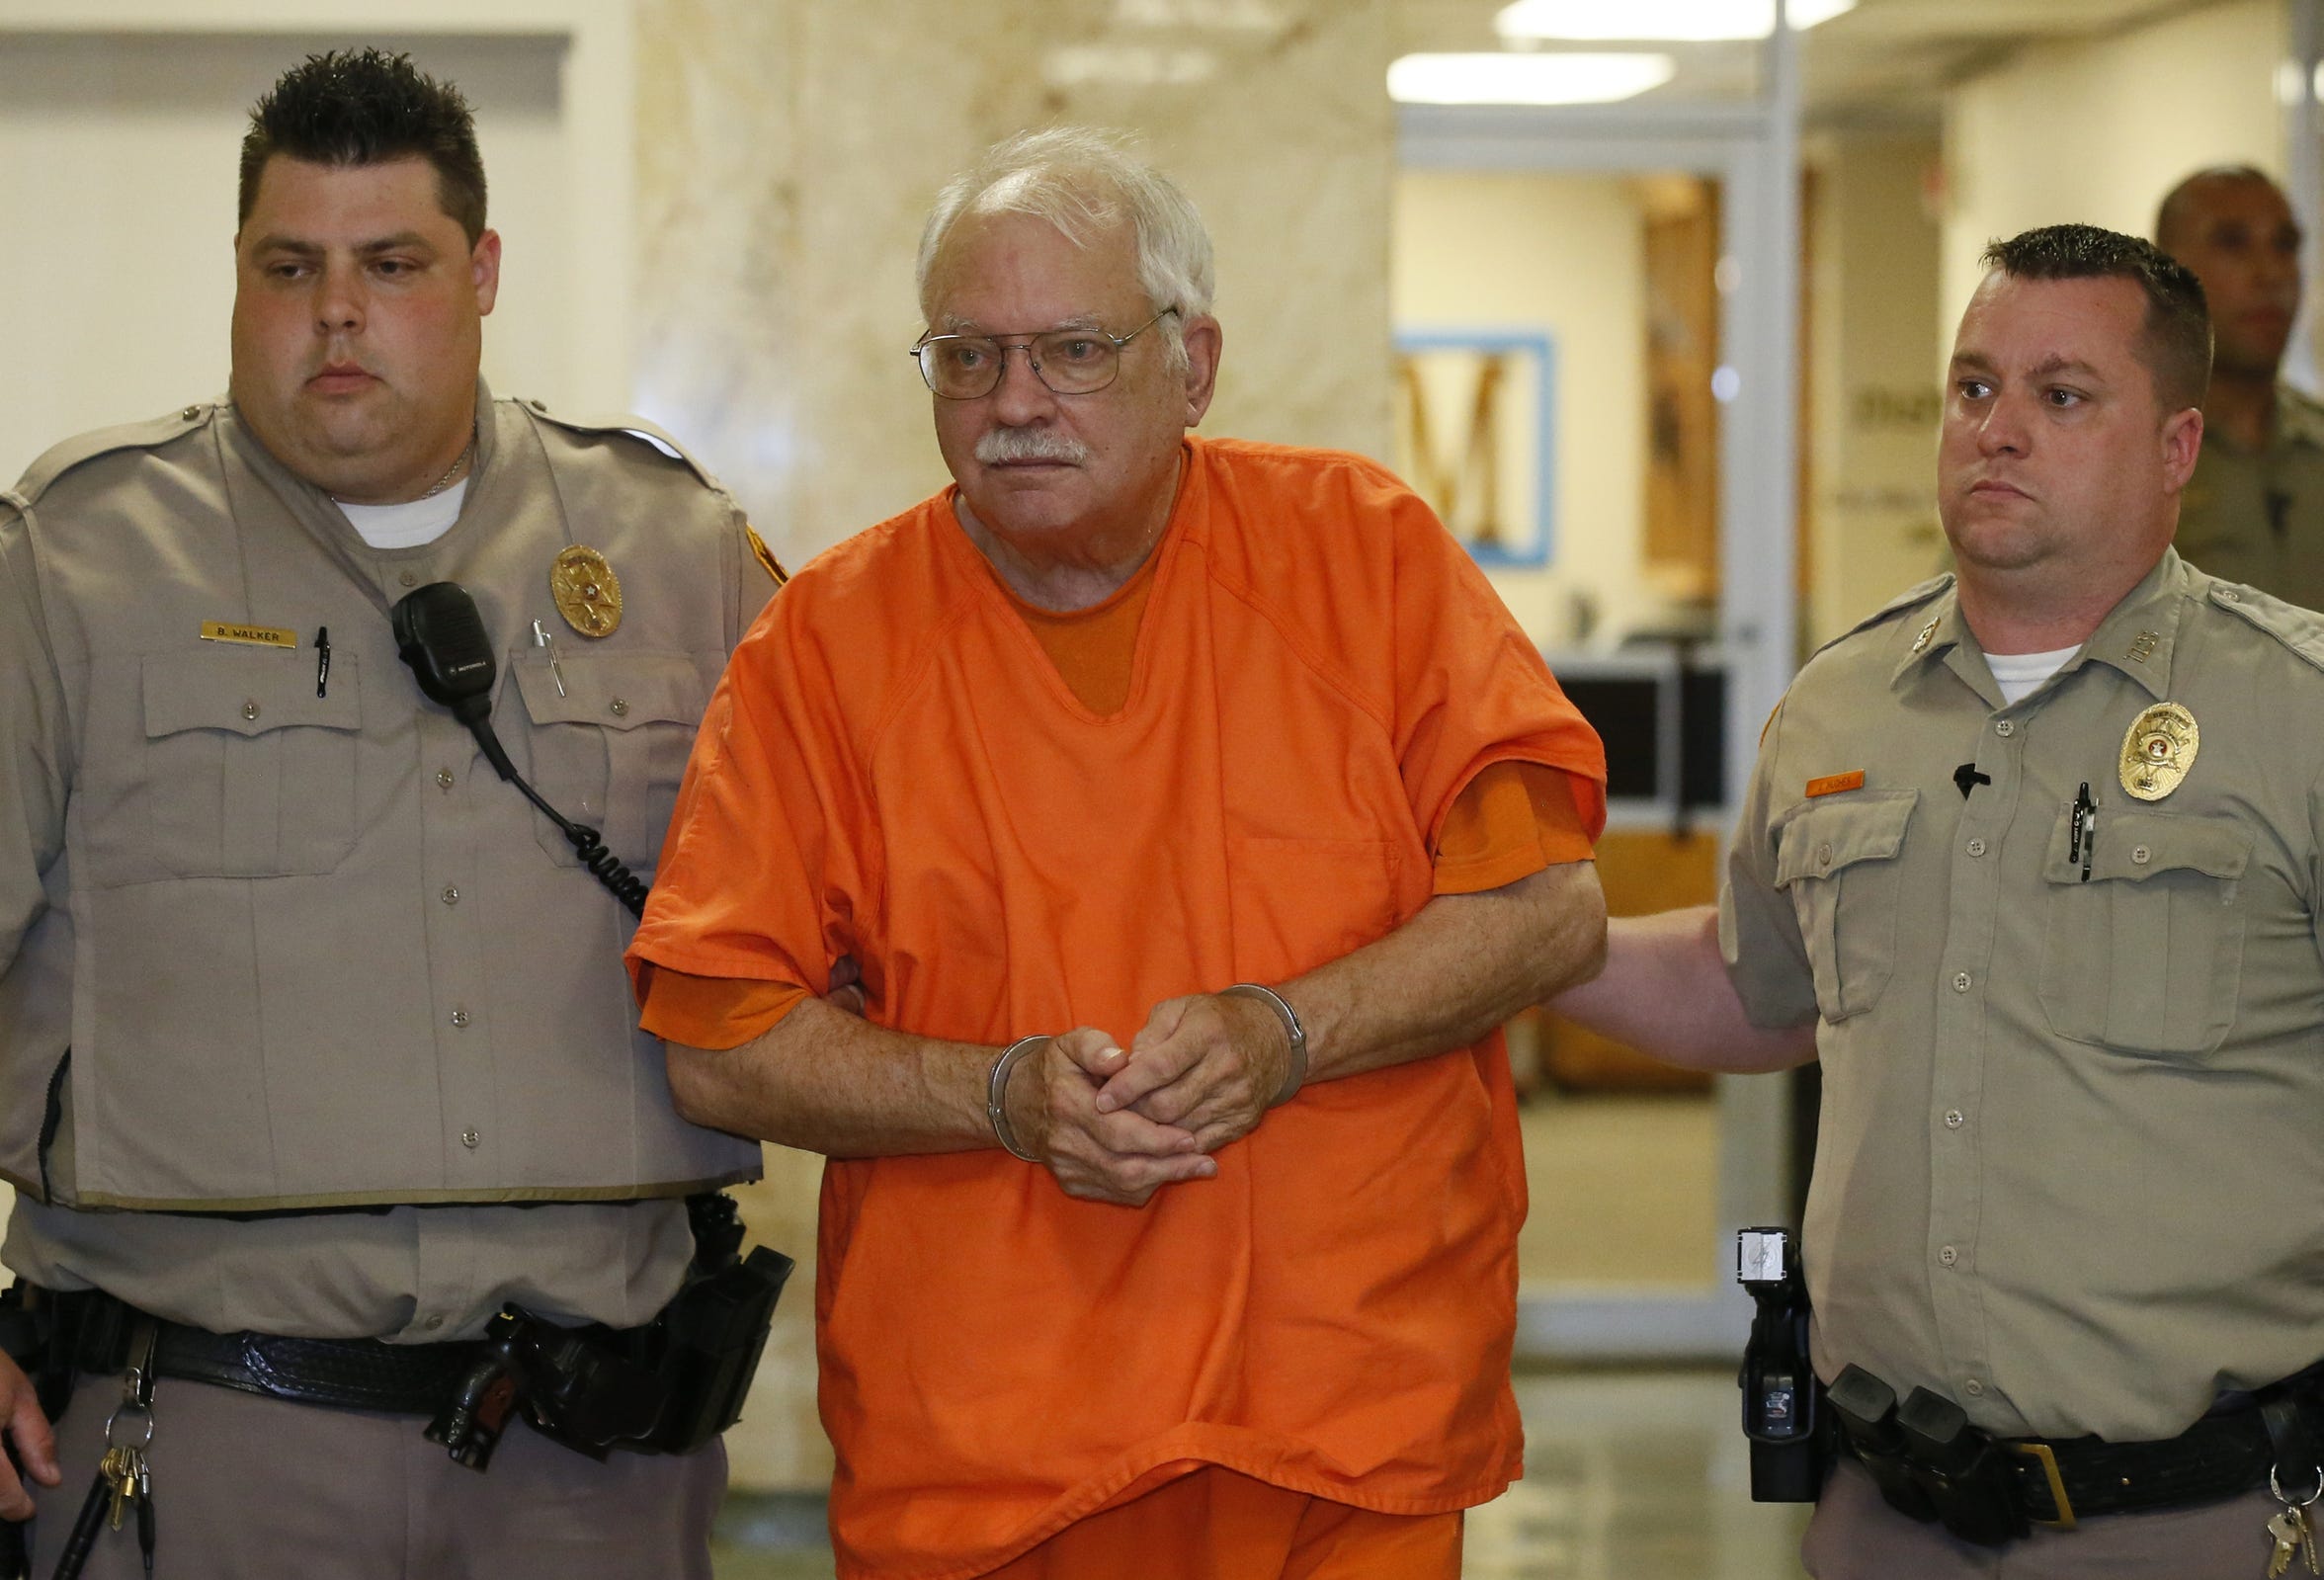 Robert Bates, a former Oklahoma volunteer sheriff's deputy who said he mistook his handgun for his stun gun when he fatally shot an unarmed suspect last year, is escorted from the courtroom following his sentencing at the courthouse in Tulsa, Okla., Tuesday, May 31, 2016. Bates, who was convicted of second-degree manslaughter, was sentenced to four years. (AP Photo/Sue Ogrocki)